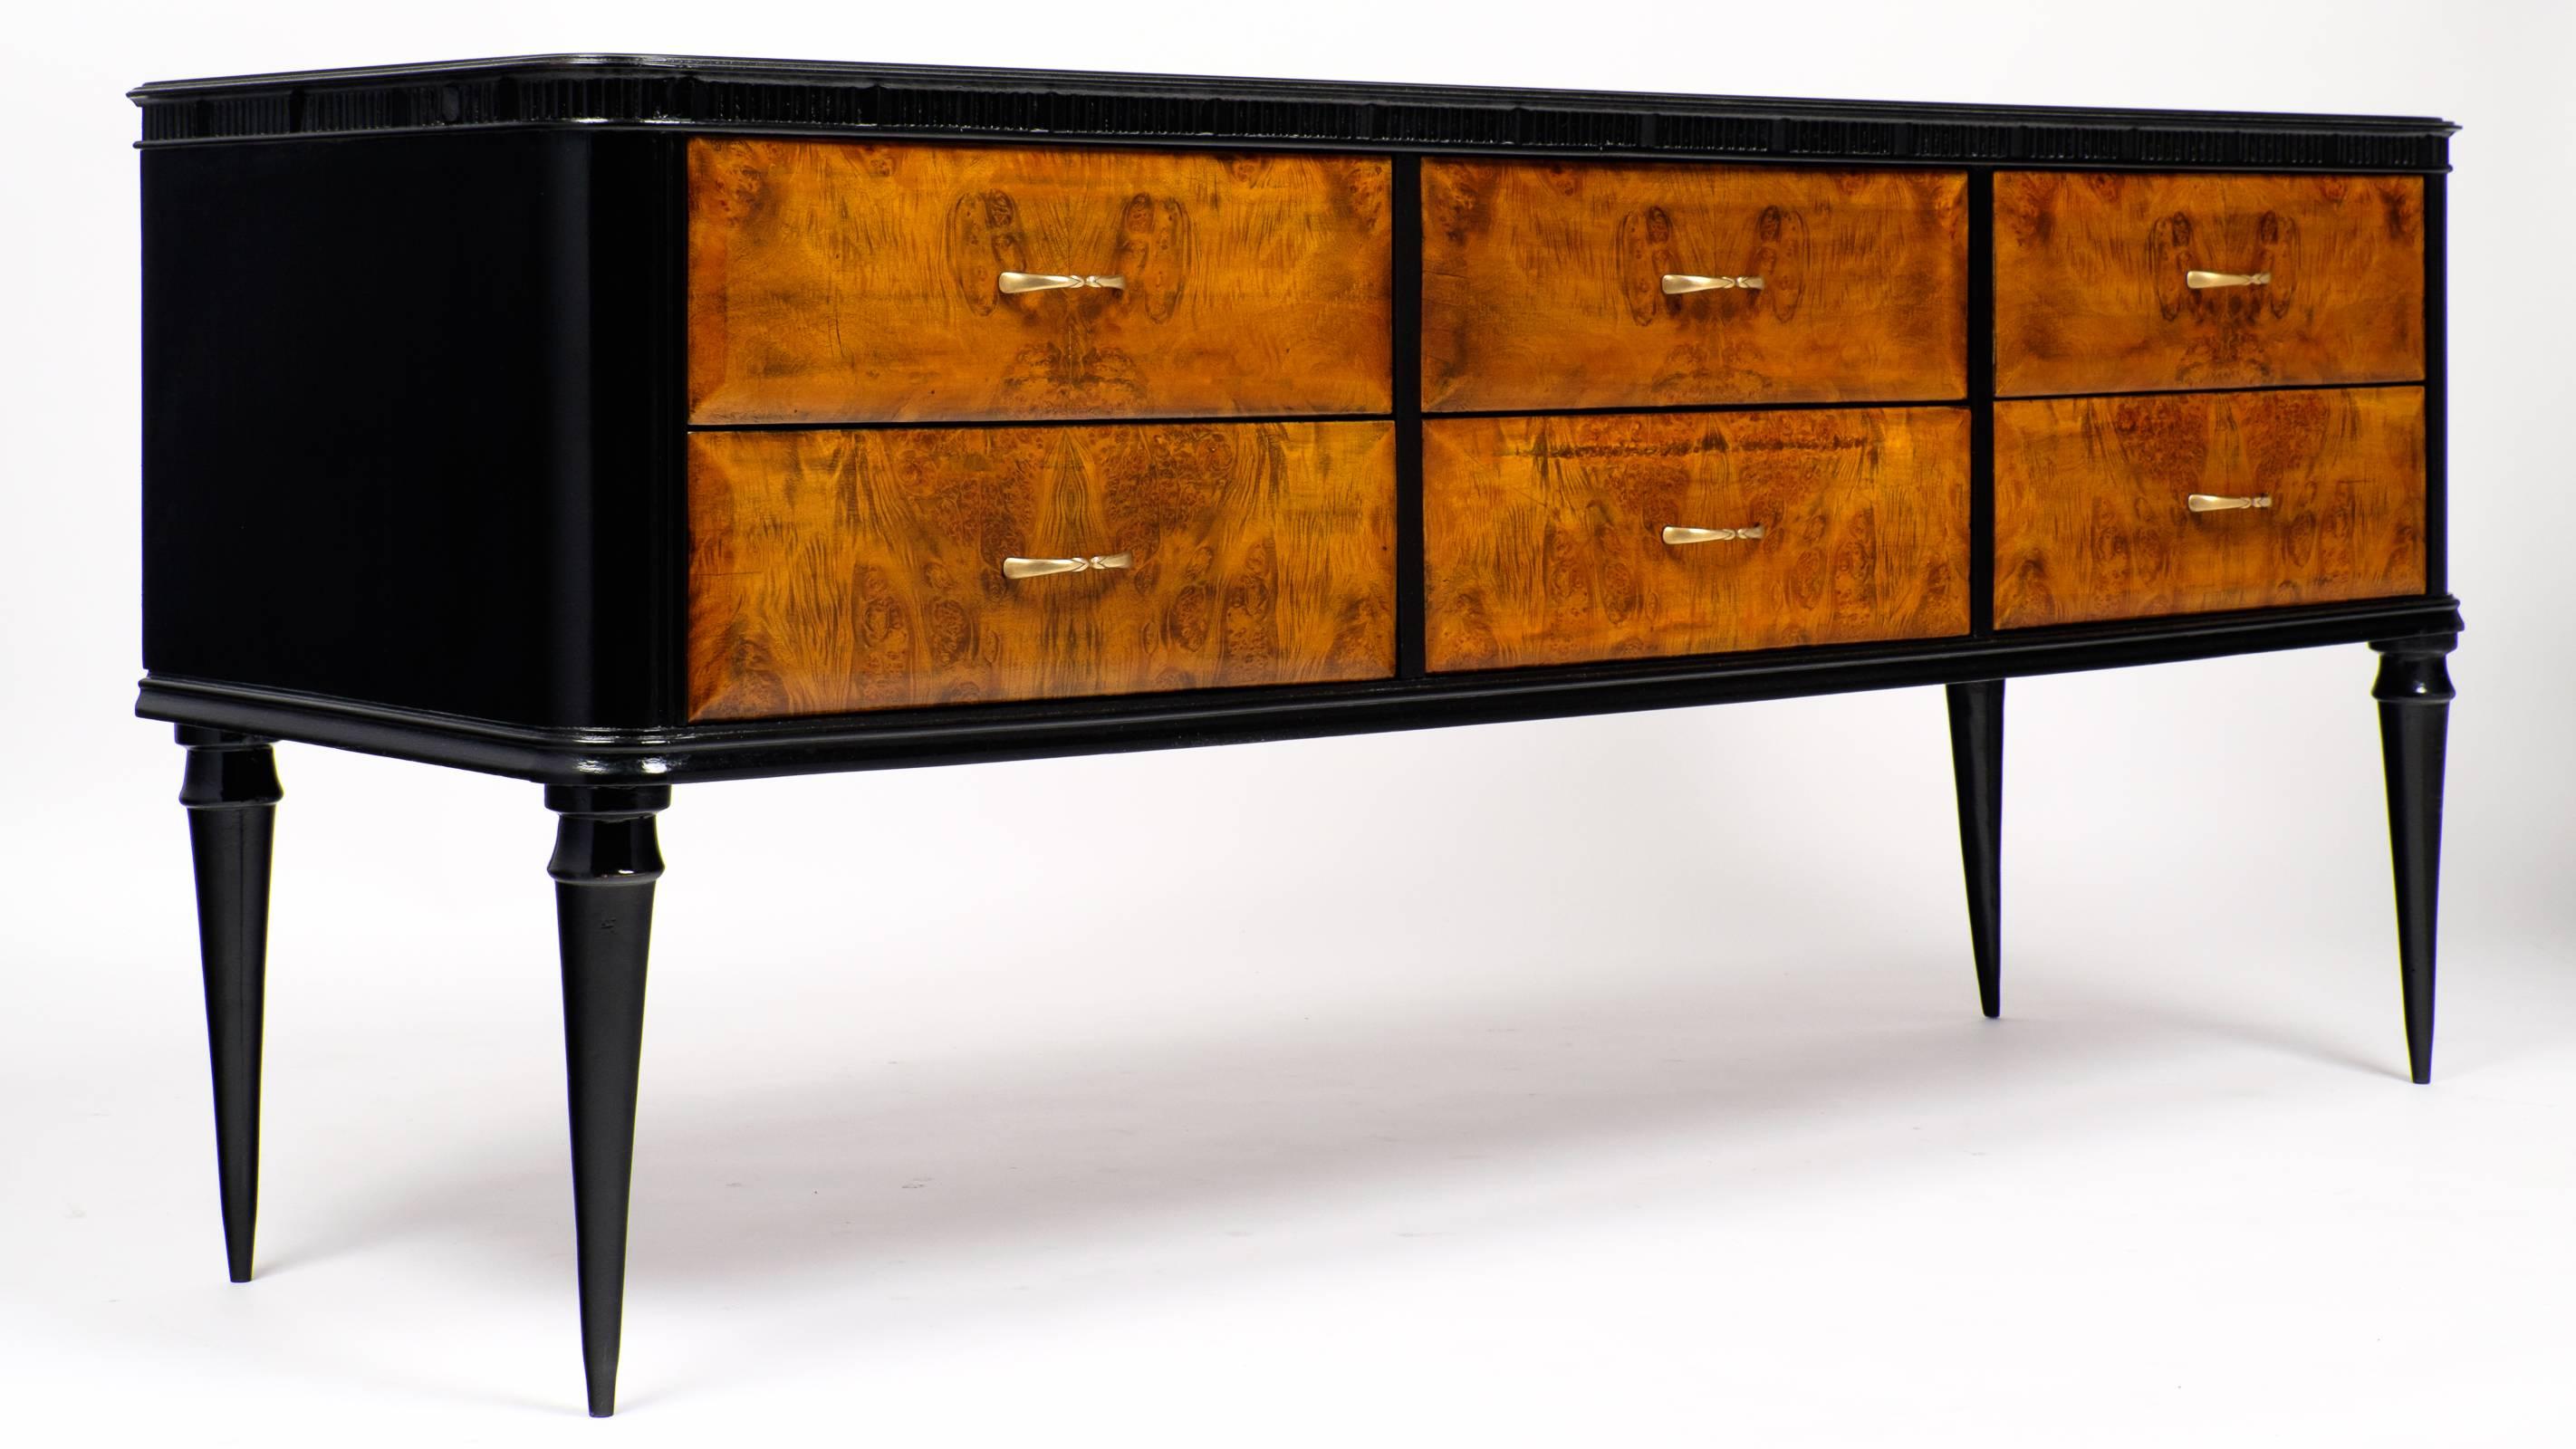 Italian Modernist console/chest in burled elm and ebonized elm with a lustrous French polish, cobalt glass top, and six gorgeous dovetailed drawers accented with original bronze hardware. We love the low profile, perfect against a wall or behind a